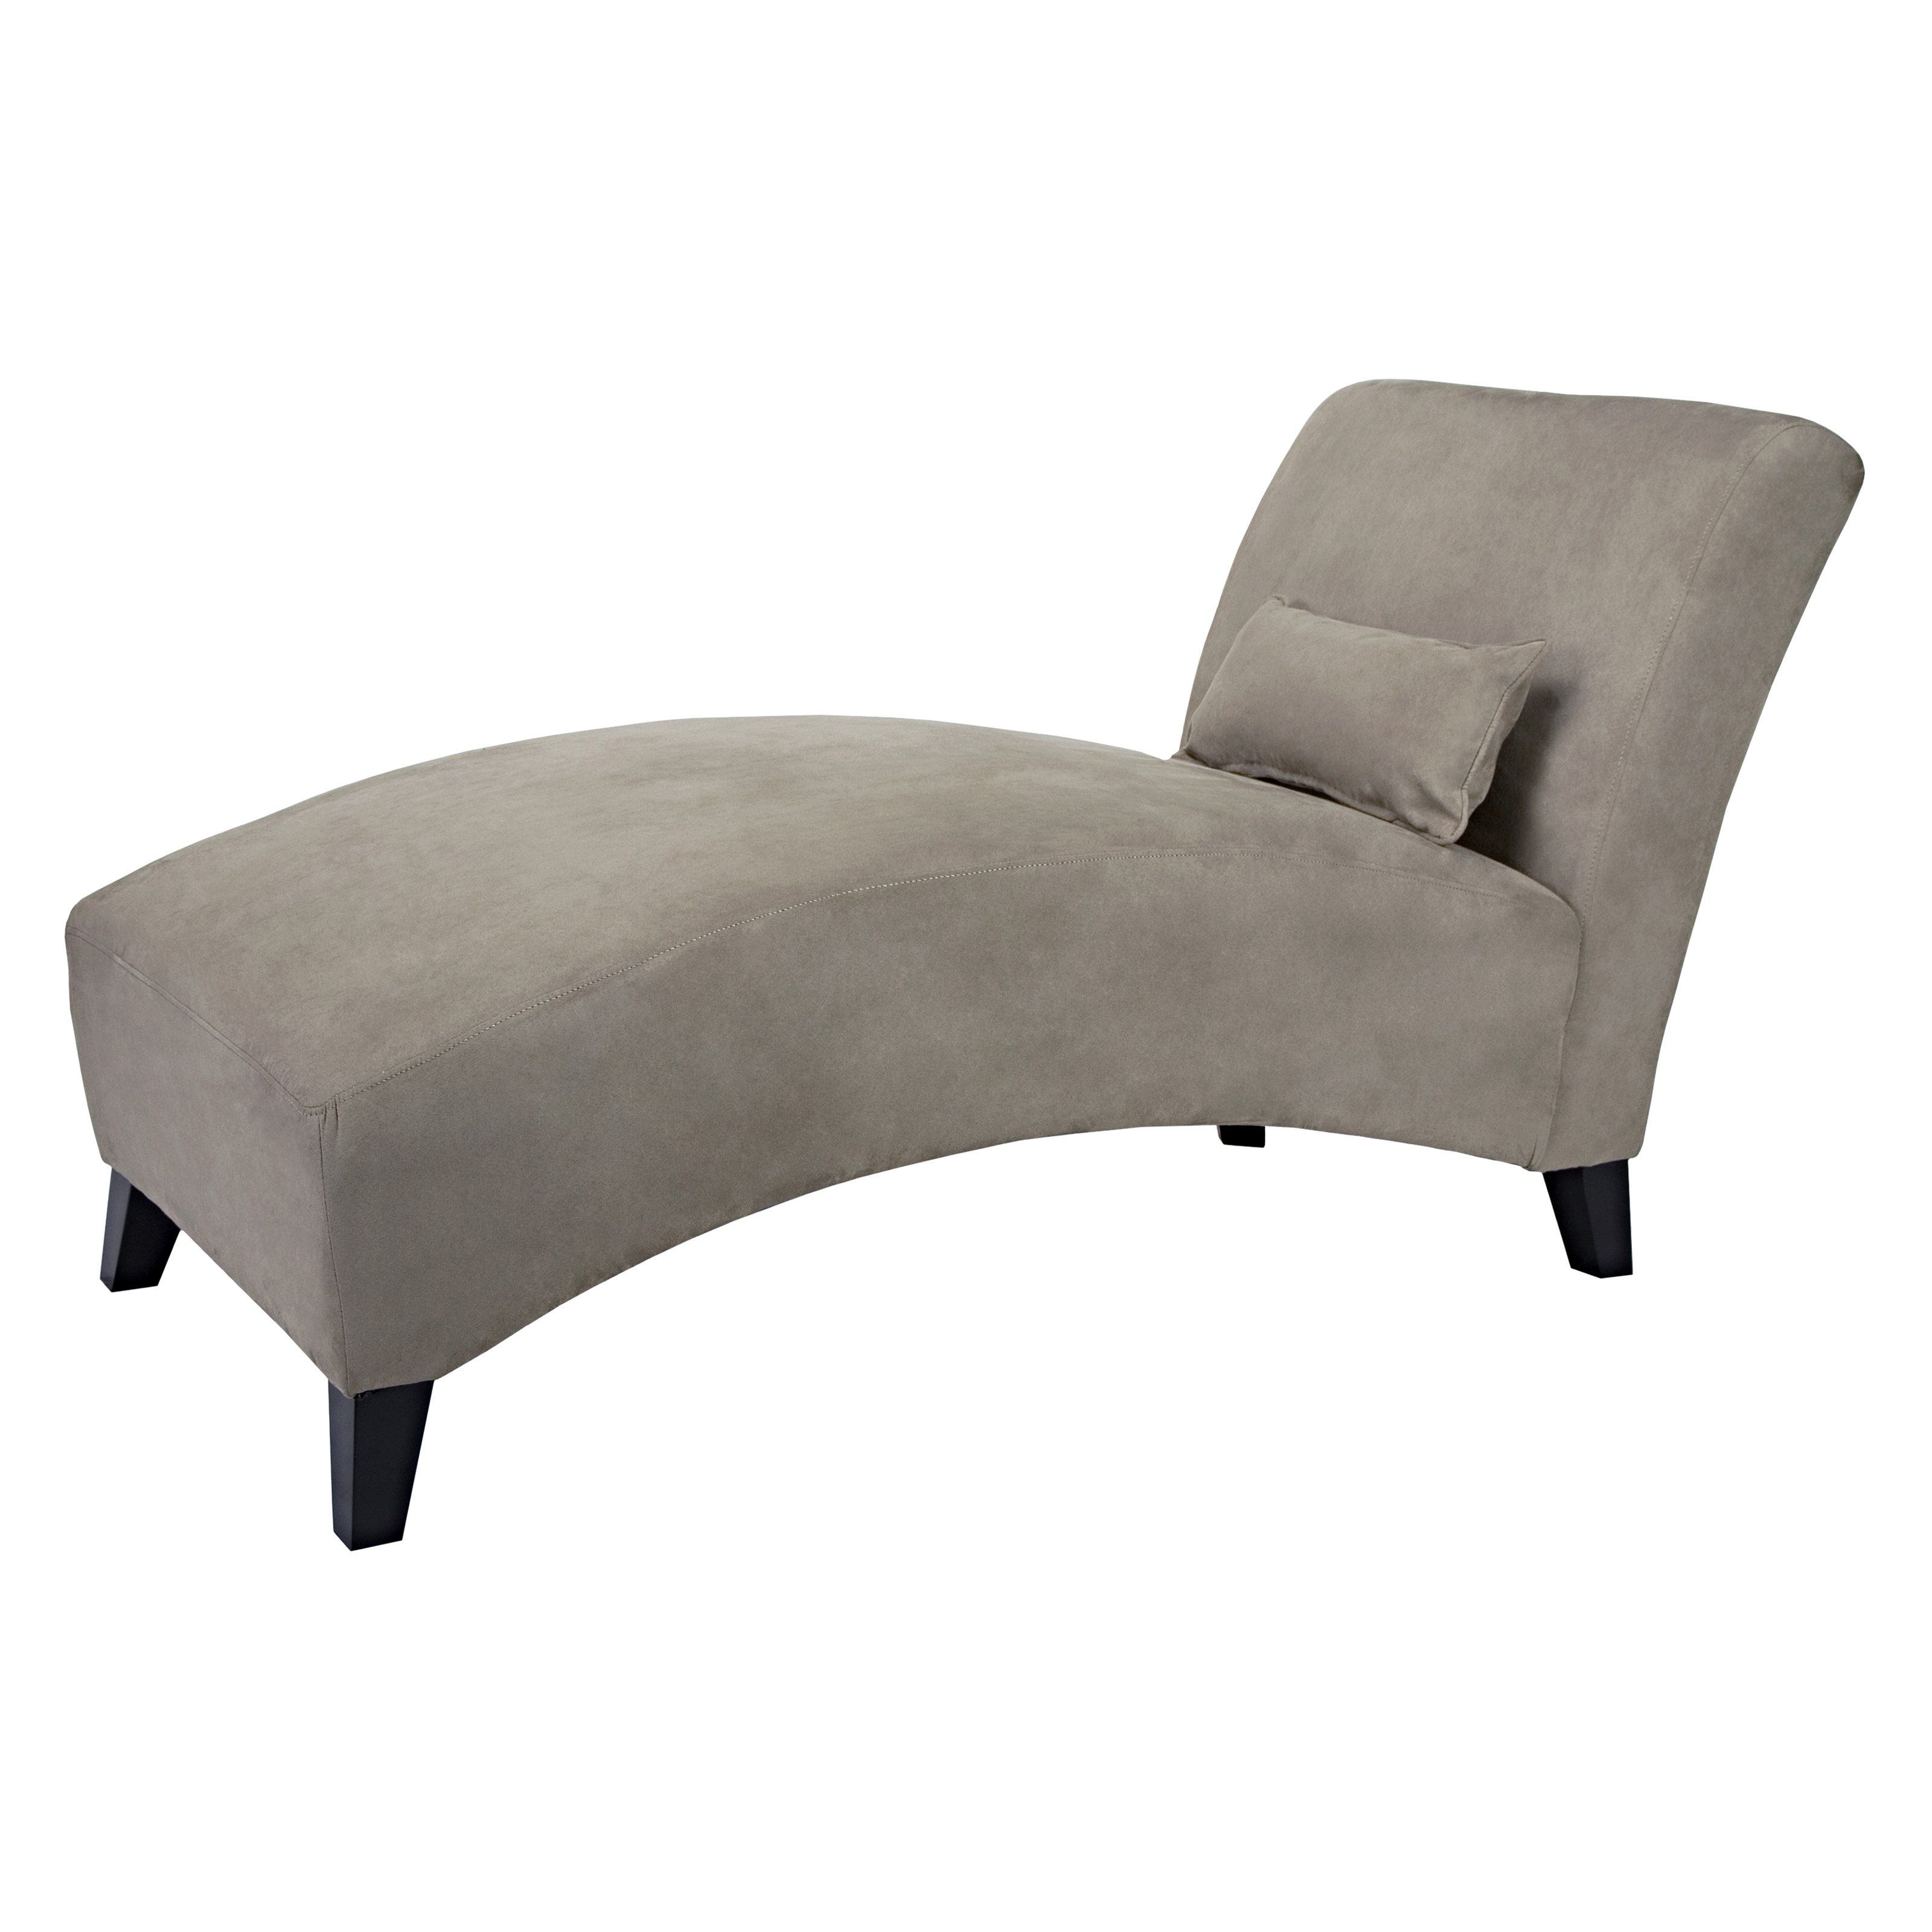 Current Indoor Chaise Lounge Slipcovers Within Decorating: Indoor Chaise Lounge Slipcovers And Leather Chaise (View 1 of 15)